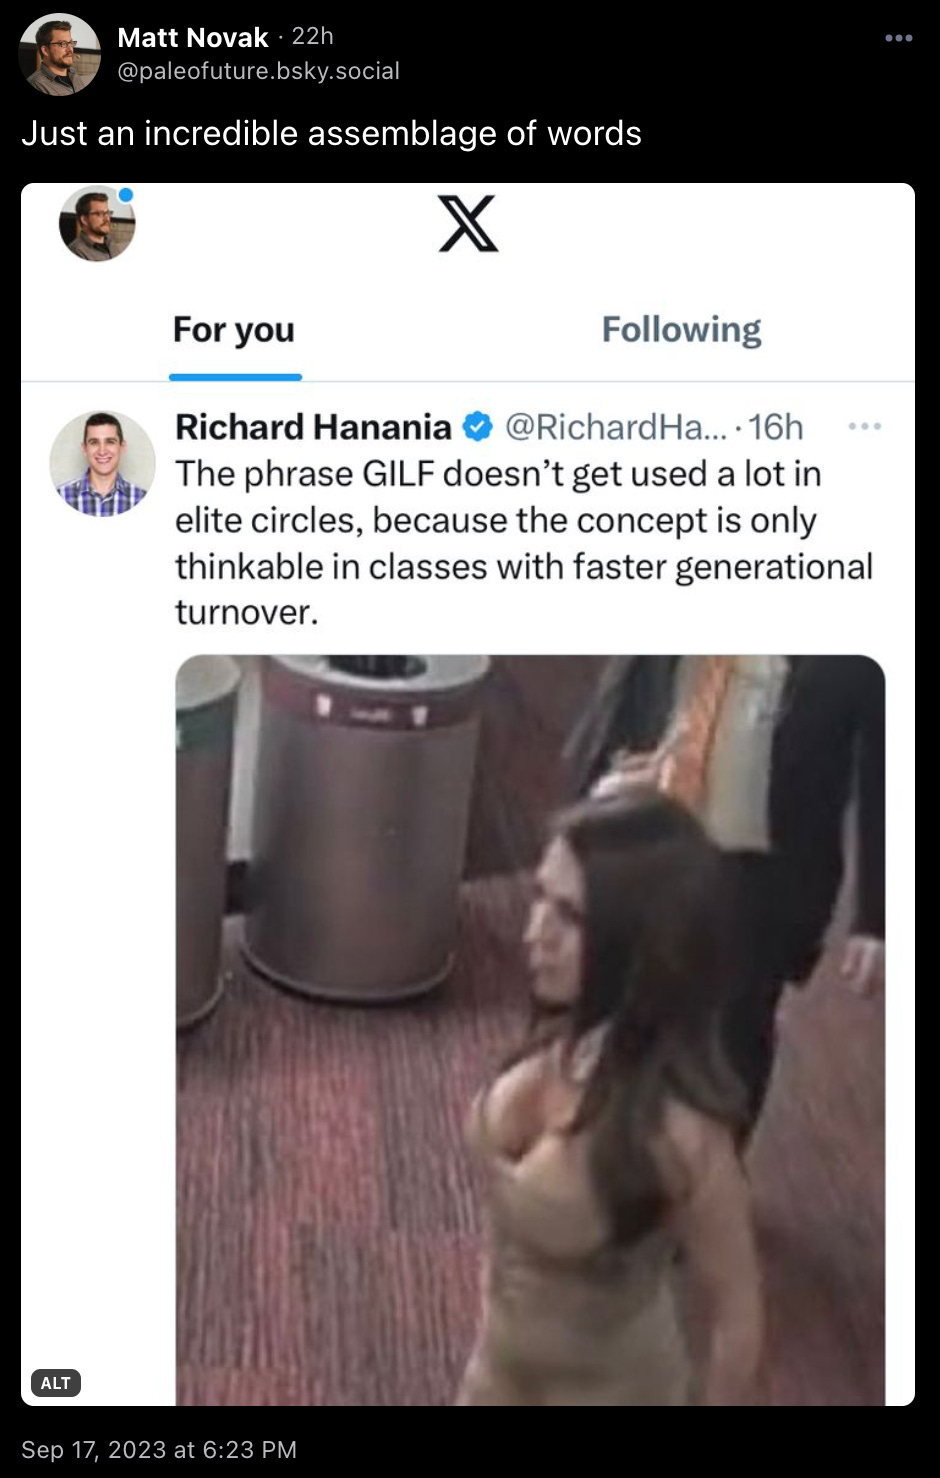 Matt Novak skeeted “Just an incredible assemblage of words” above an accurately-described screenshot of a Richard Hanania tweet with a picture of Boebert (a 36 year old grandmother) and the statement: “The phrase GILF doesn’t get used a lot in elite circles, because the concept is only thinkable in classes with faster generational turnover.” 